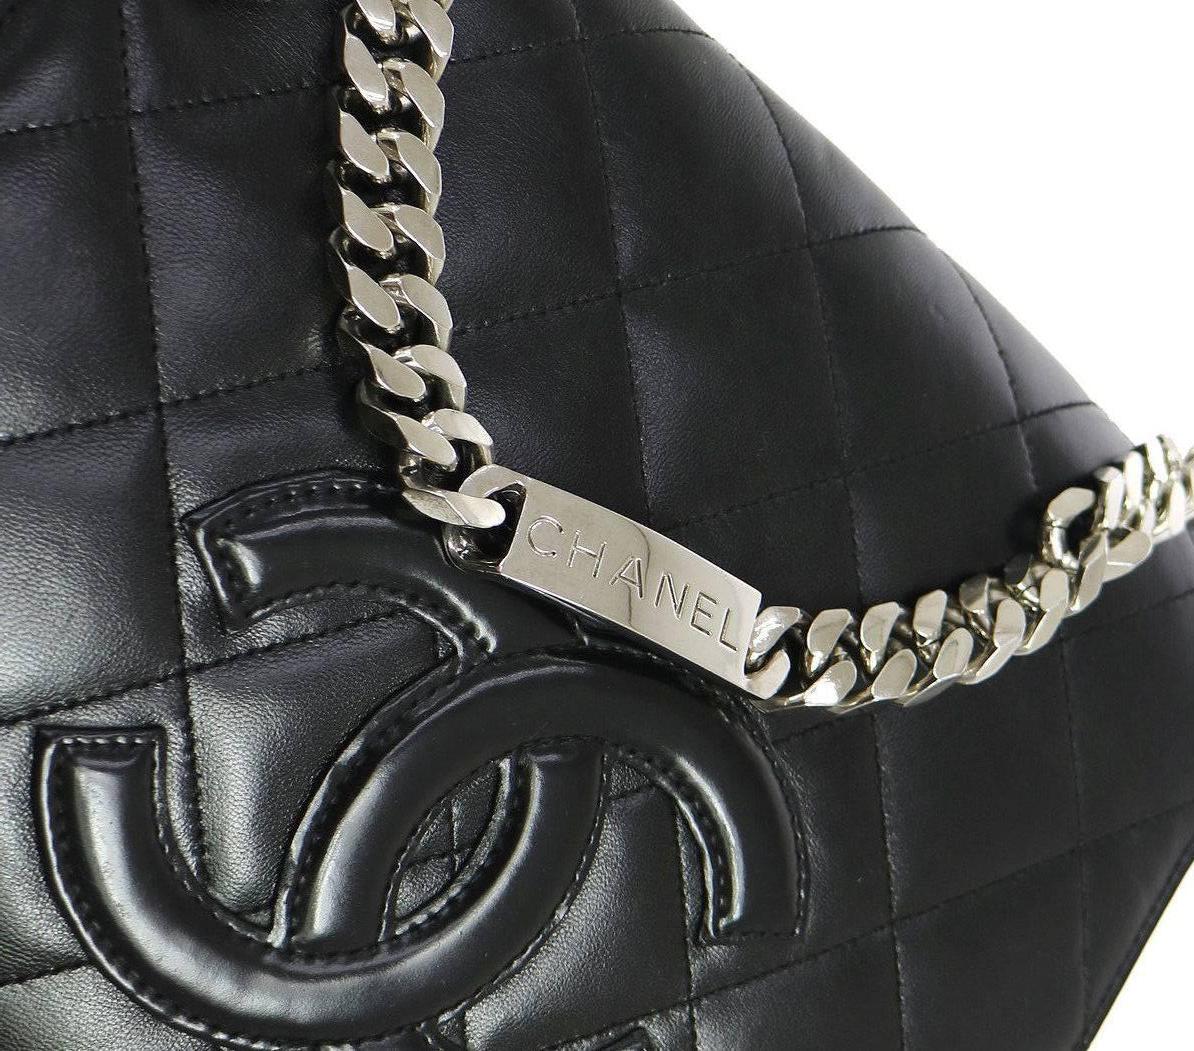 Chanel Black Lambskin Silver Chain Top Handle Satchel Evening Flap Shoulder Bag

Leather
Silver tone hardware
Leather lining
Date code present
Made in France
Handle drop 4"
Measures 8.75" W x 8.25" H x 4" D  
Includes original